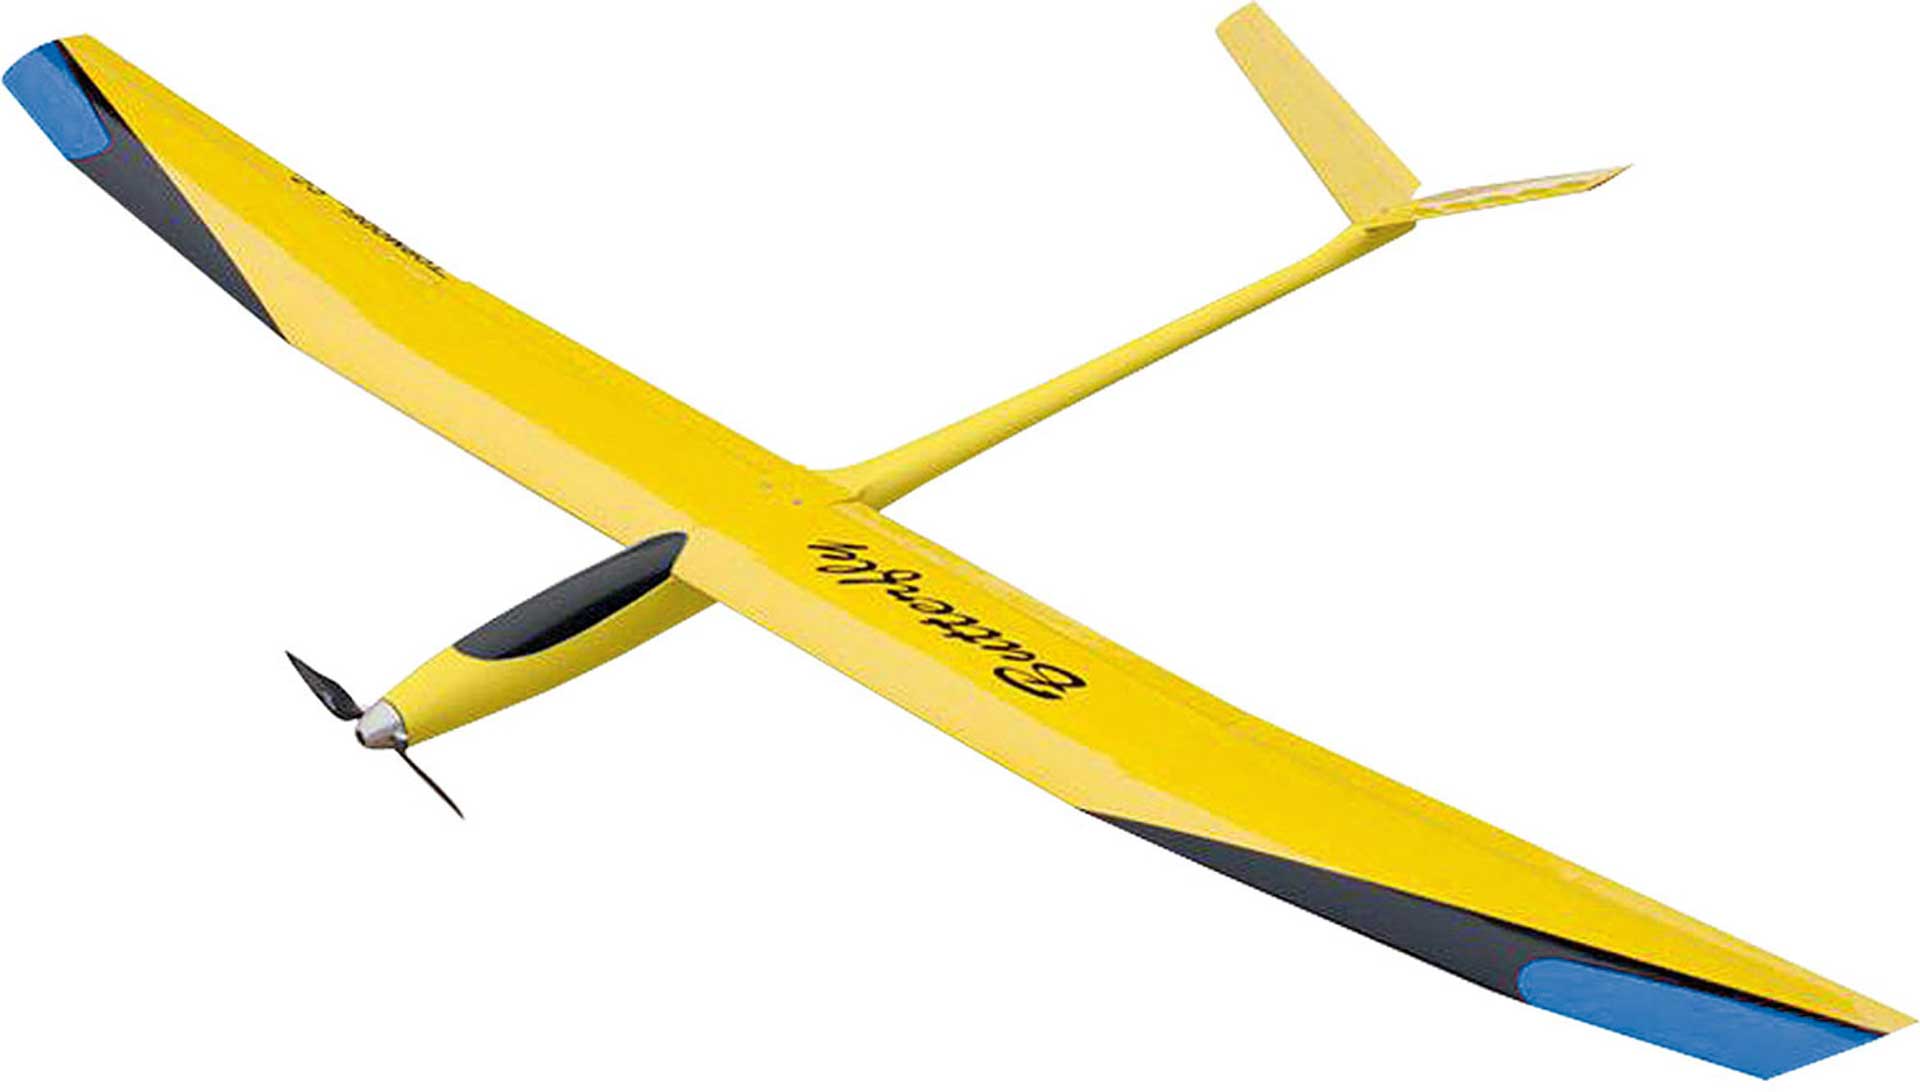 TOPMODEL BUTTERFLY ELECTRO WITH GRP FUSELAGE AND STYRO BALSA WING WITH FULL COMPOSITE FUSELAGE AND STYRO BALSA WINGS